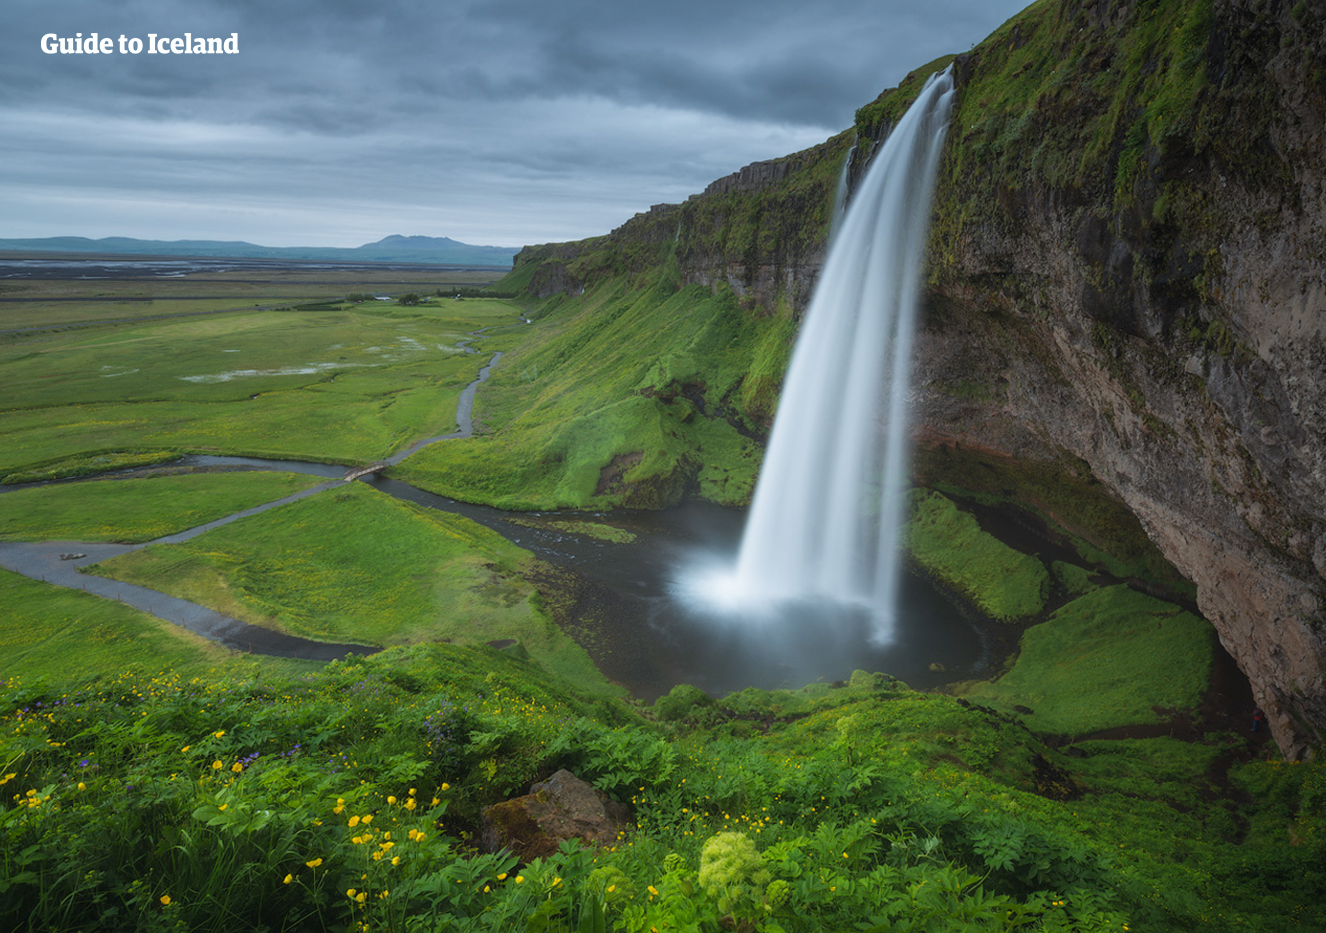 Seljalandsfoss Waterfall on the incredibly popular South Coast Tourist Route along the famous Ring Road of Iceland.